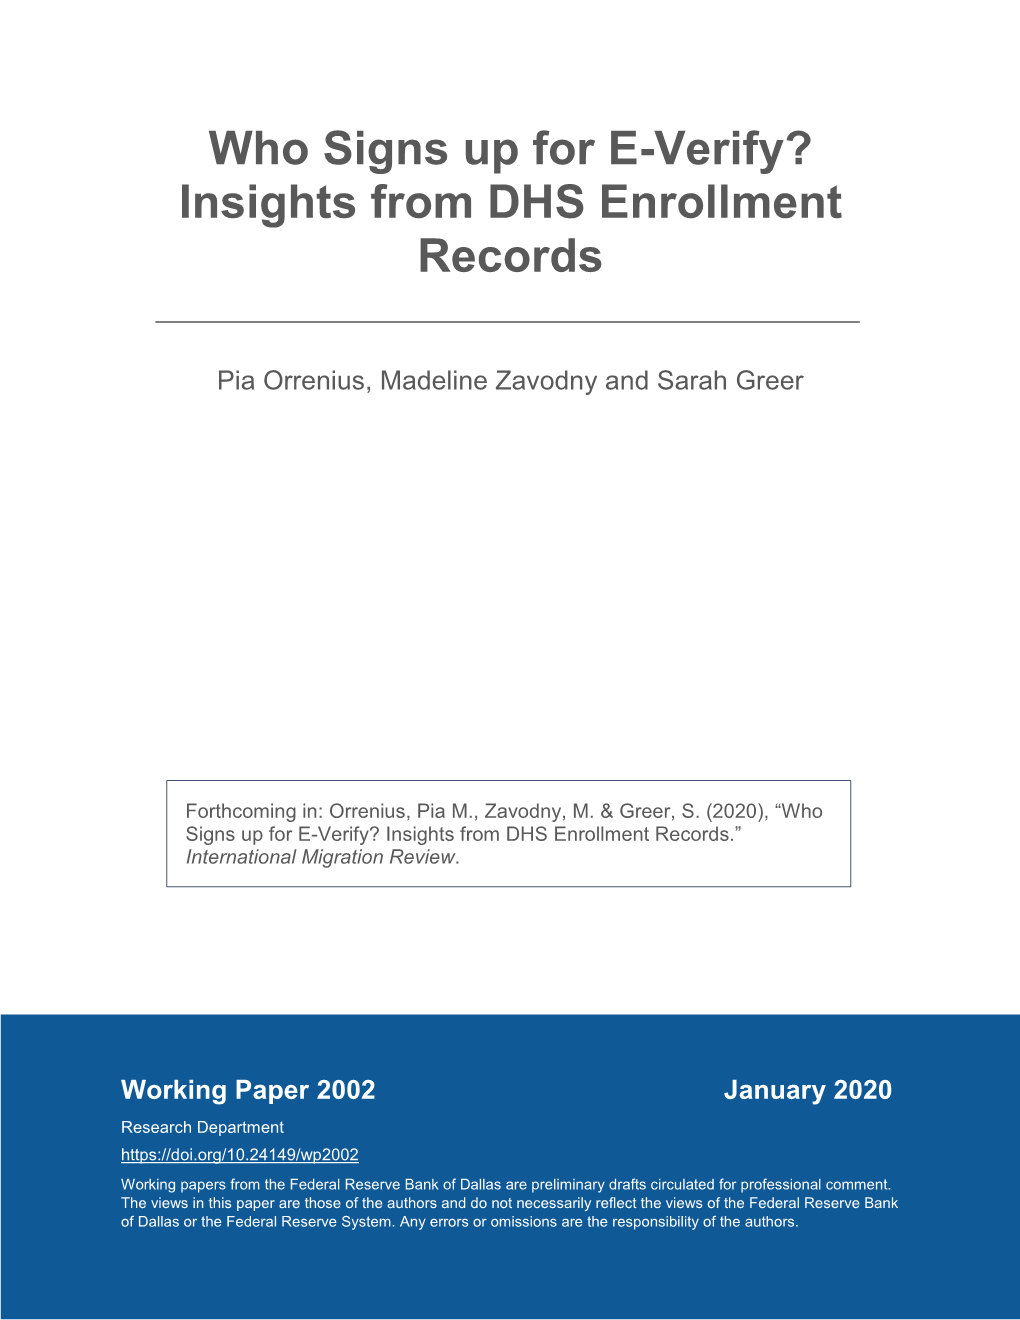 Who Signs up for E-Verify? Insights from DHS Enrollment Records